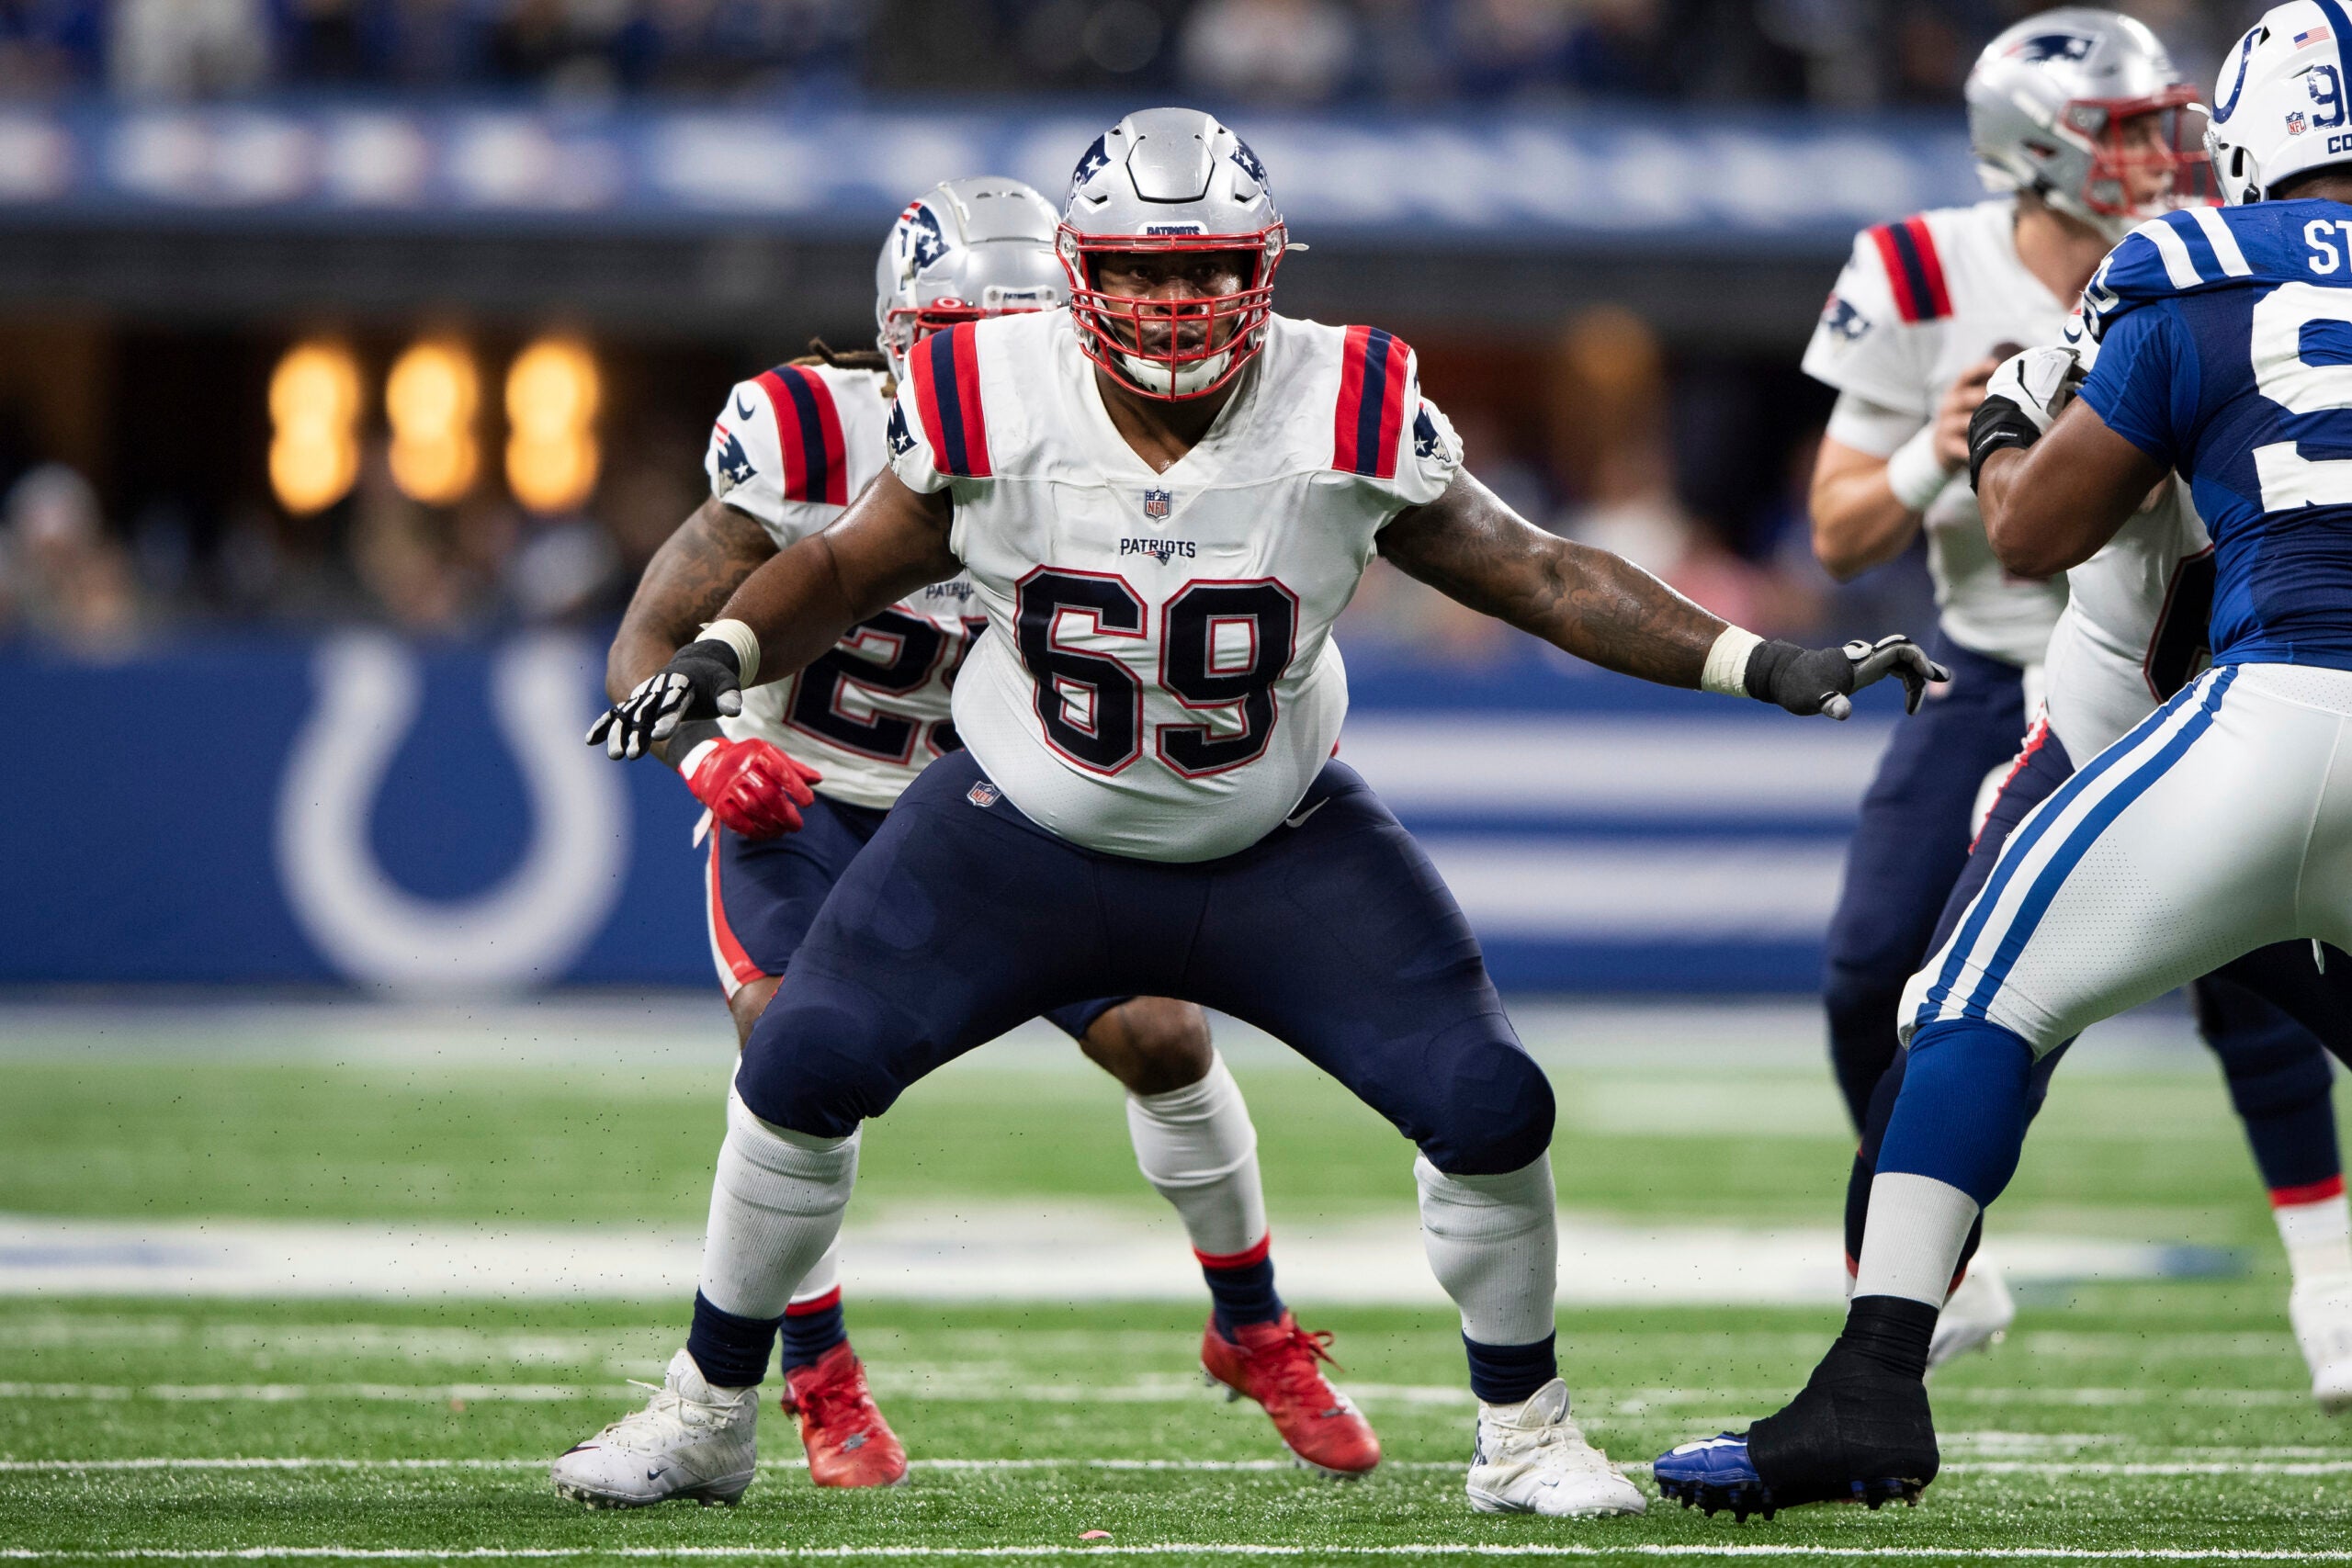 Report: Patriots trade Shaq Mason to Buccaneers for 5th round pick